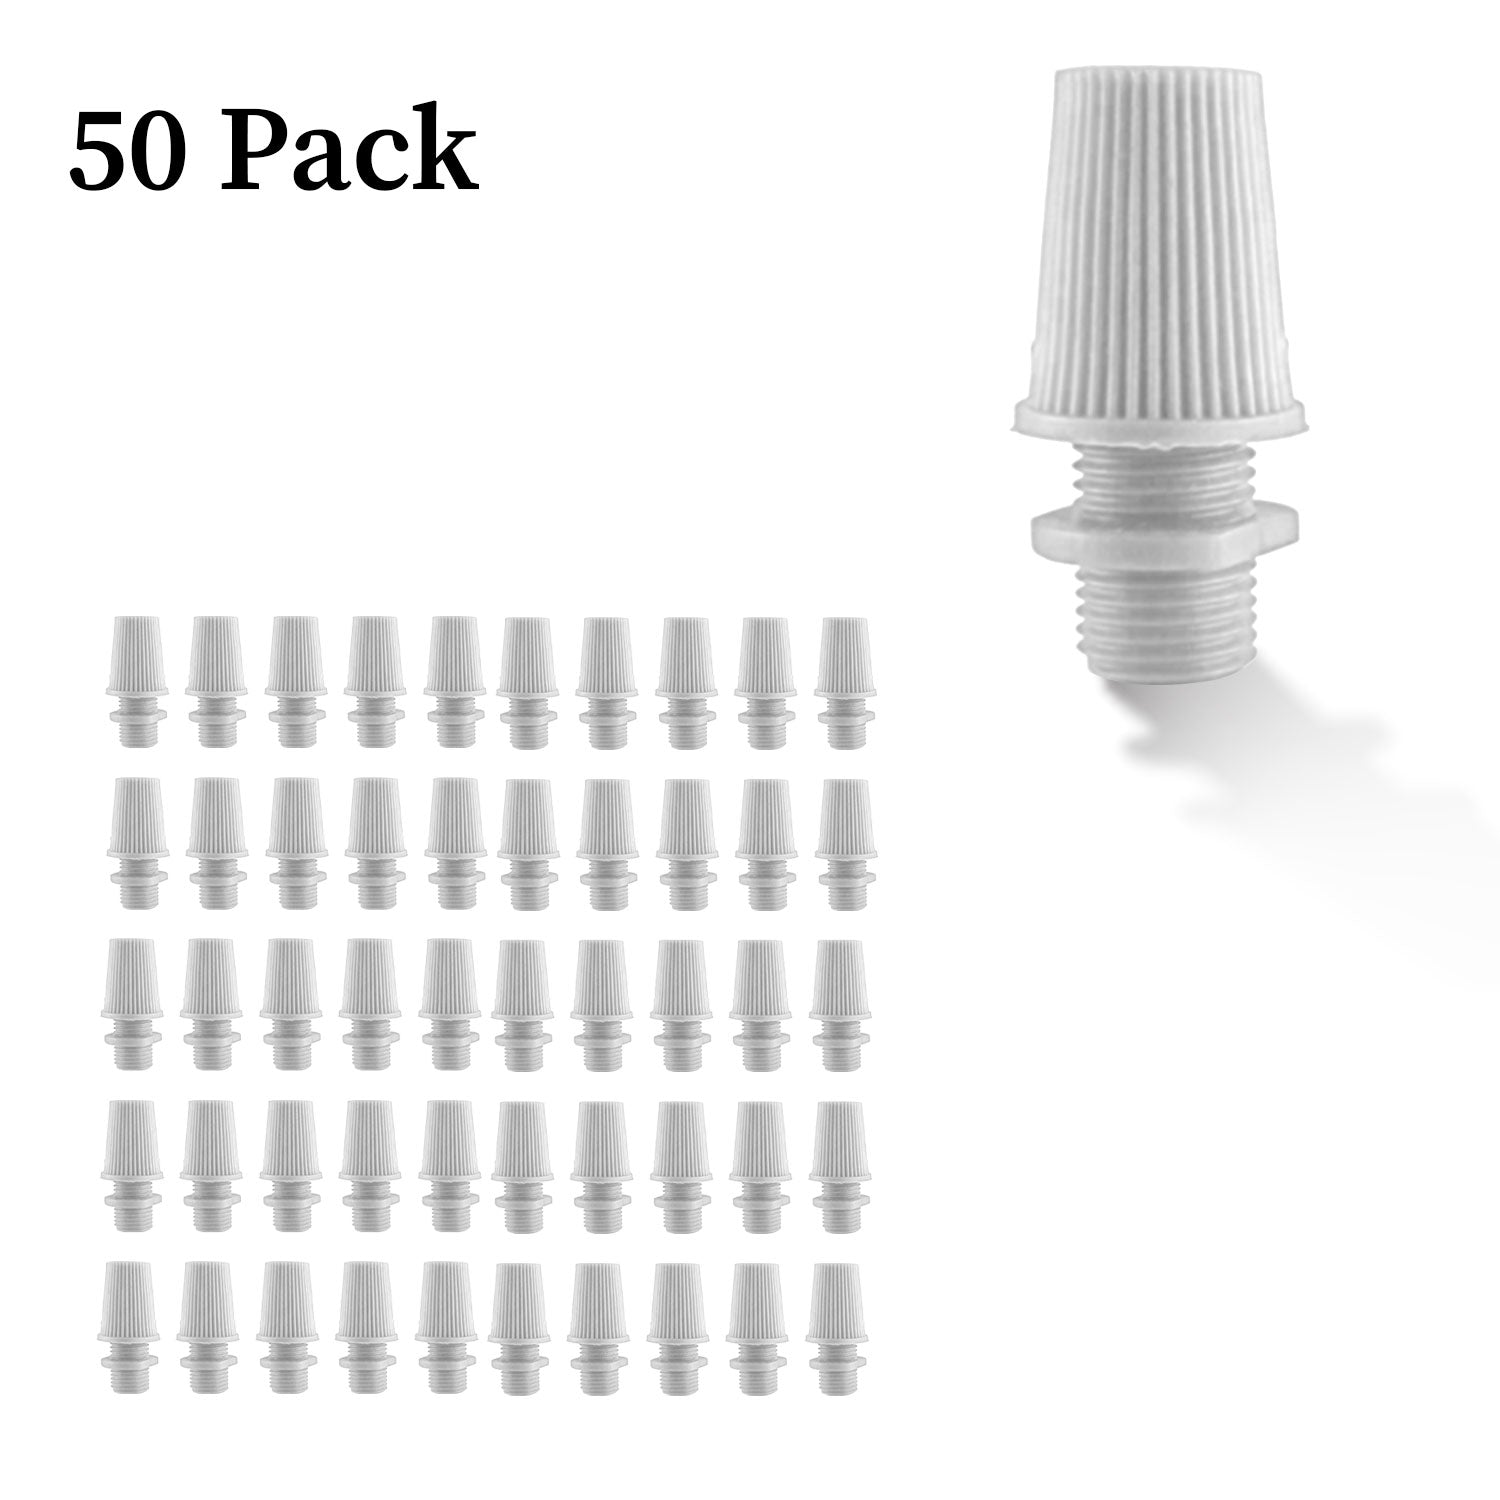 50 pack 100mm white cable cord grip lock